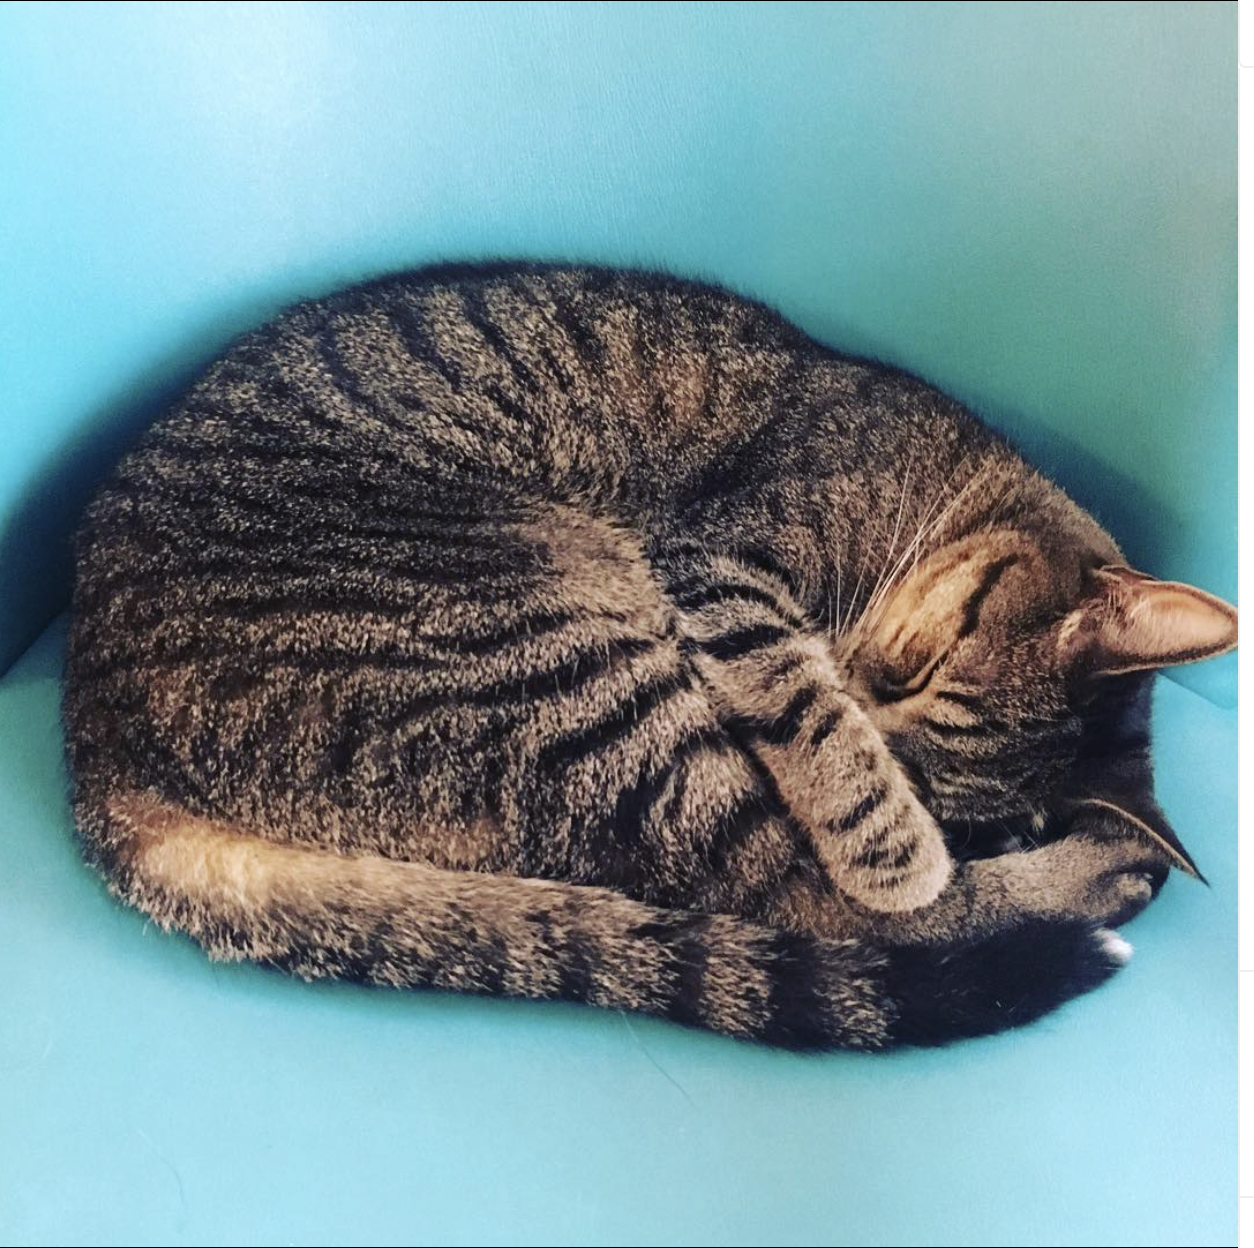 Black and tan tabby cat curled up on a teal chair